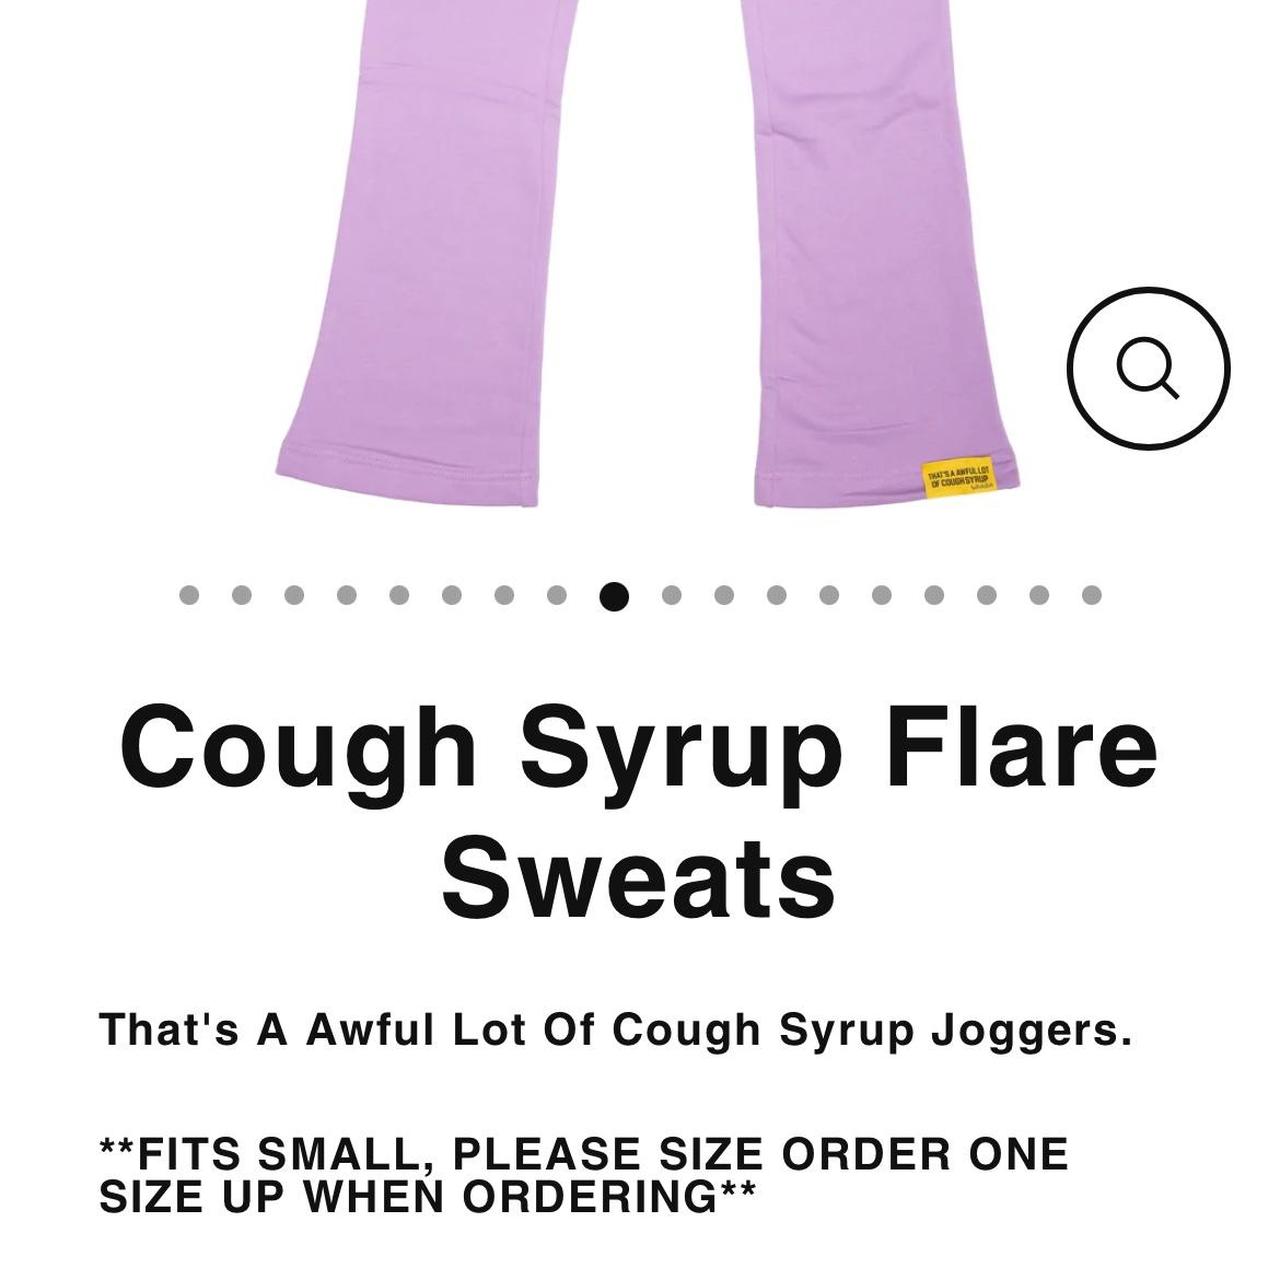 Cough Syrup Flare Sweats – THATS A AWFUL LOT OF